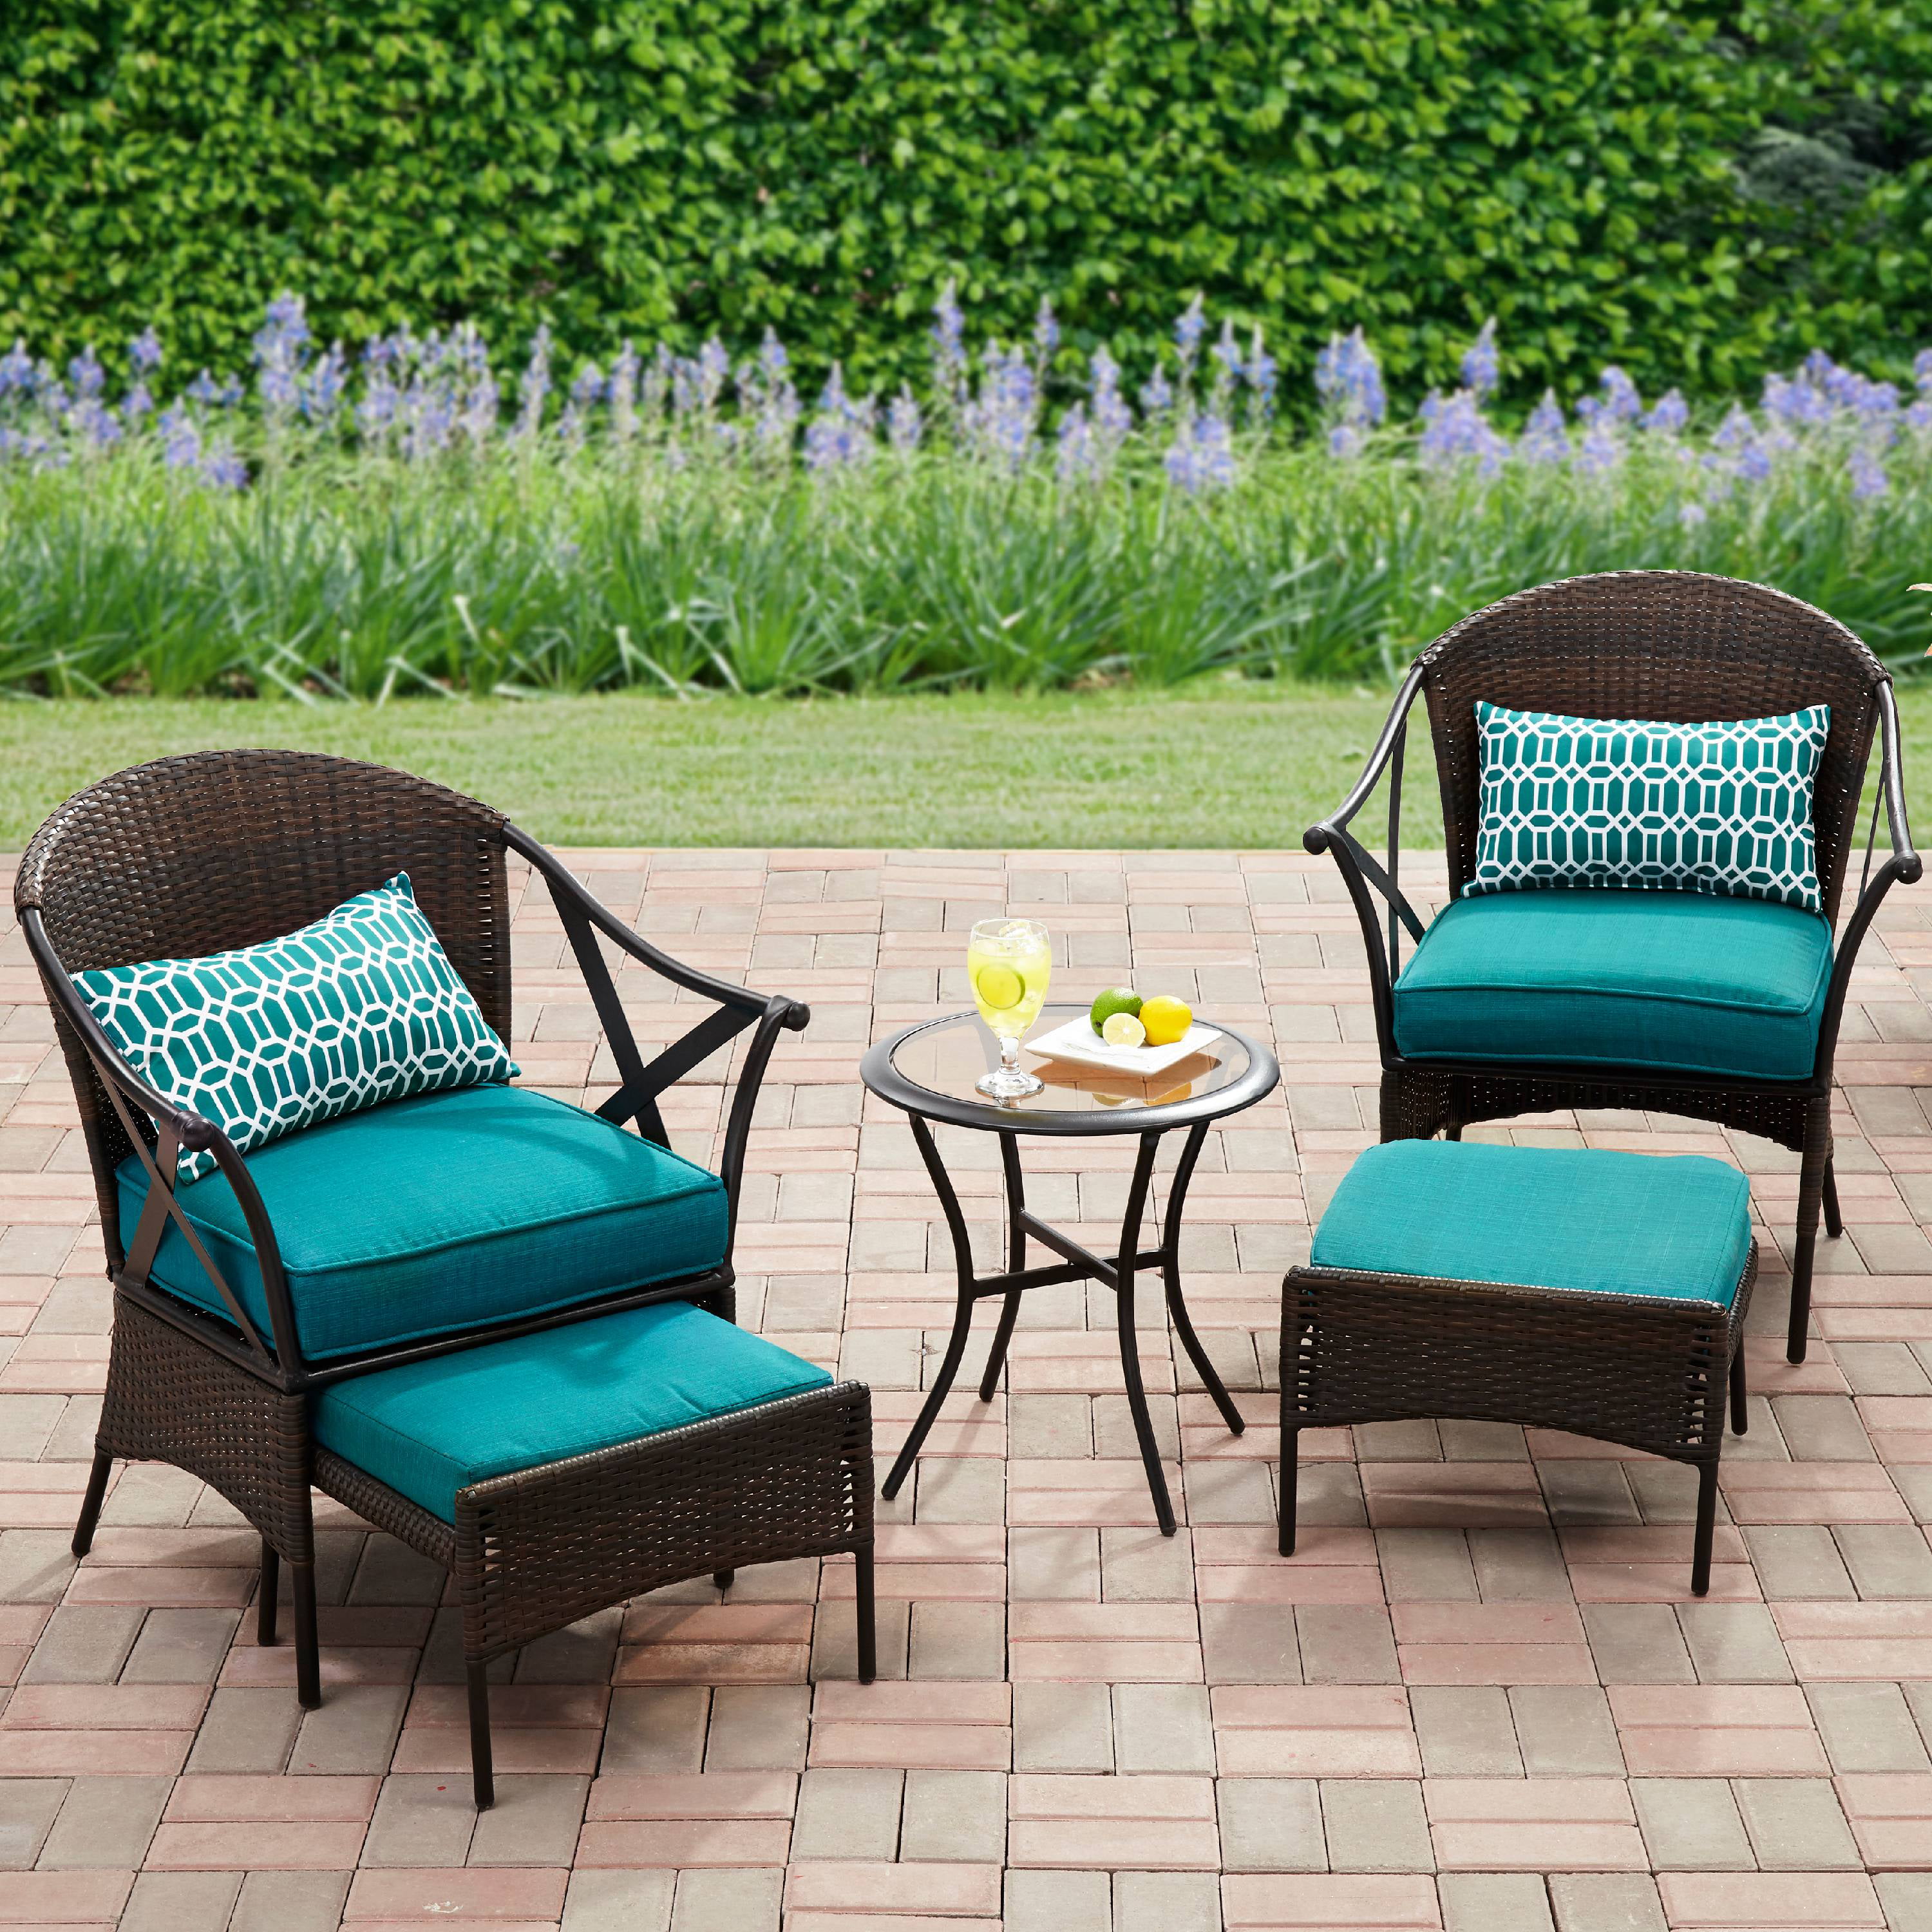 Outdoor Furniture Set 5pc Deck Patio Garden Table Teal Cushioned